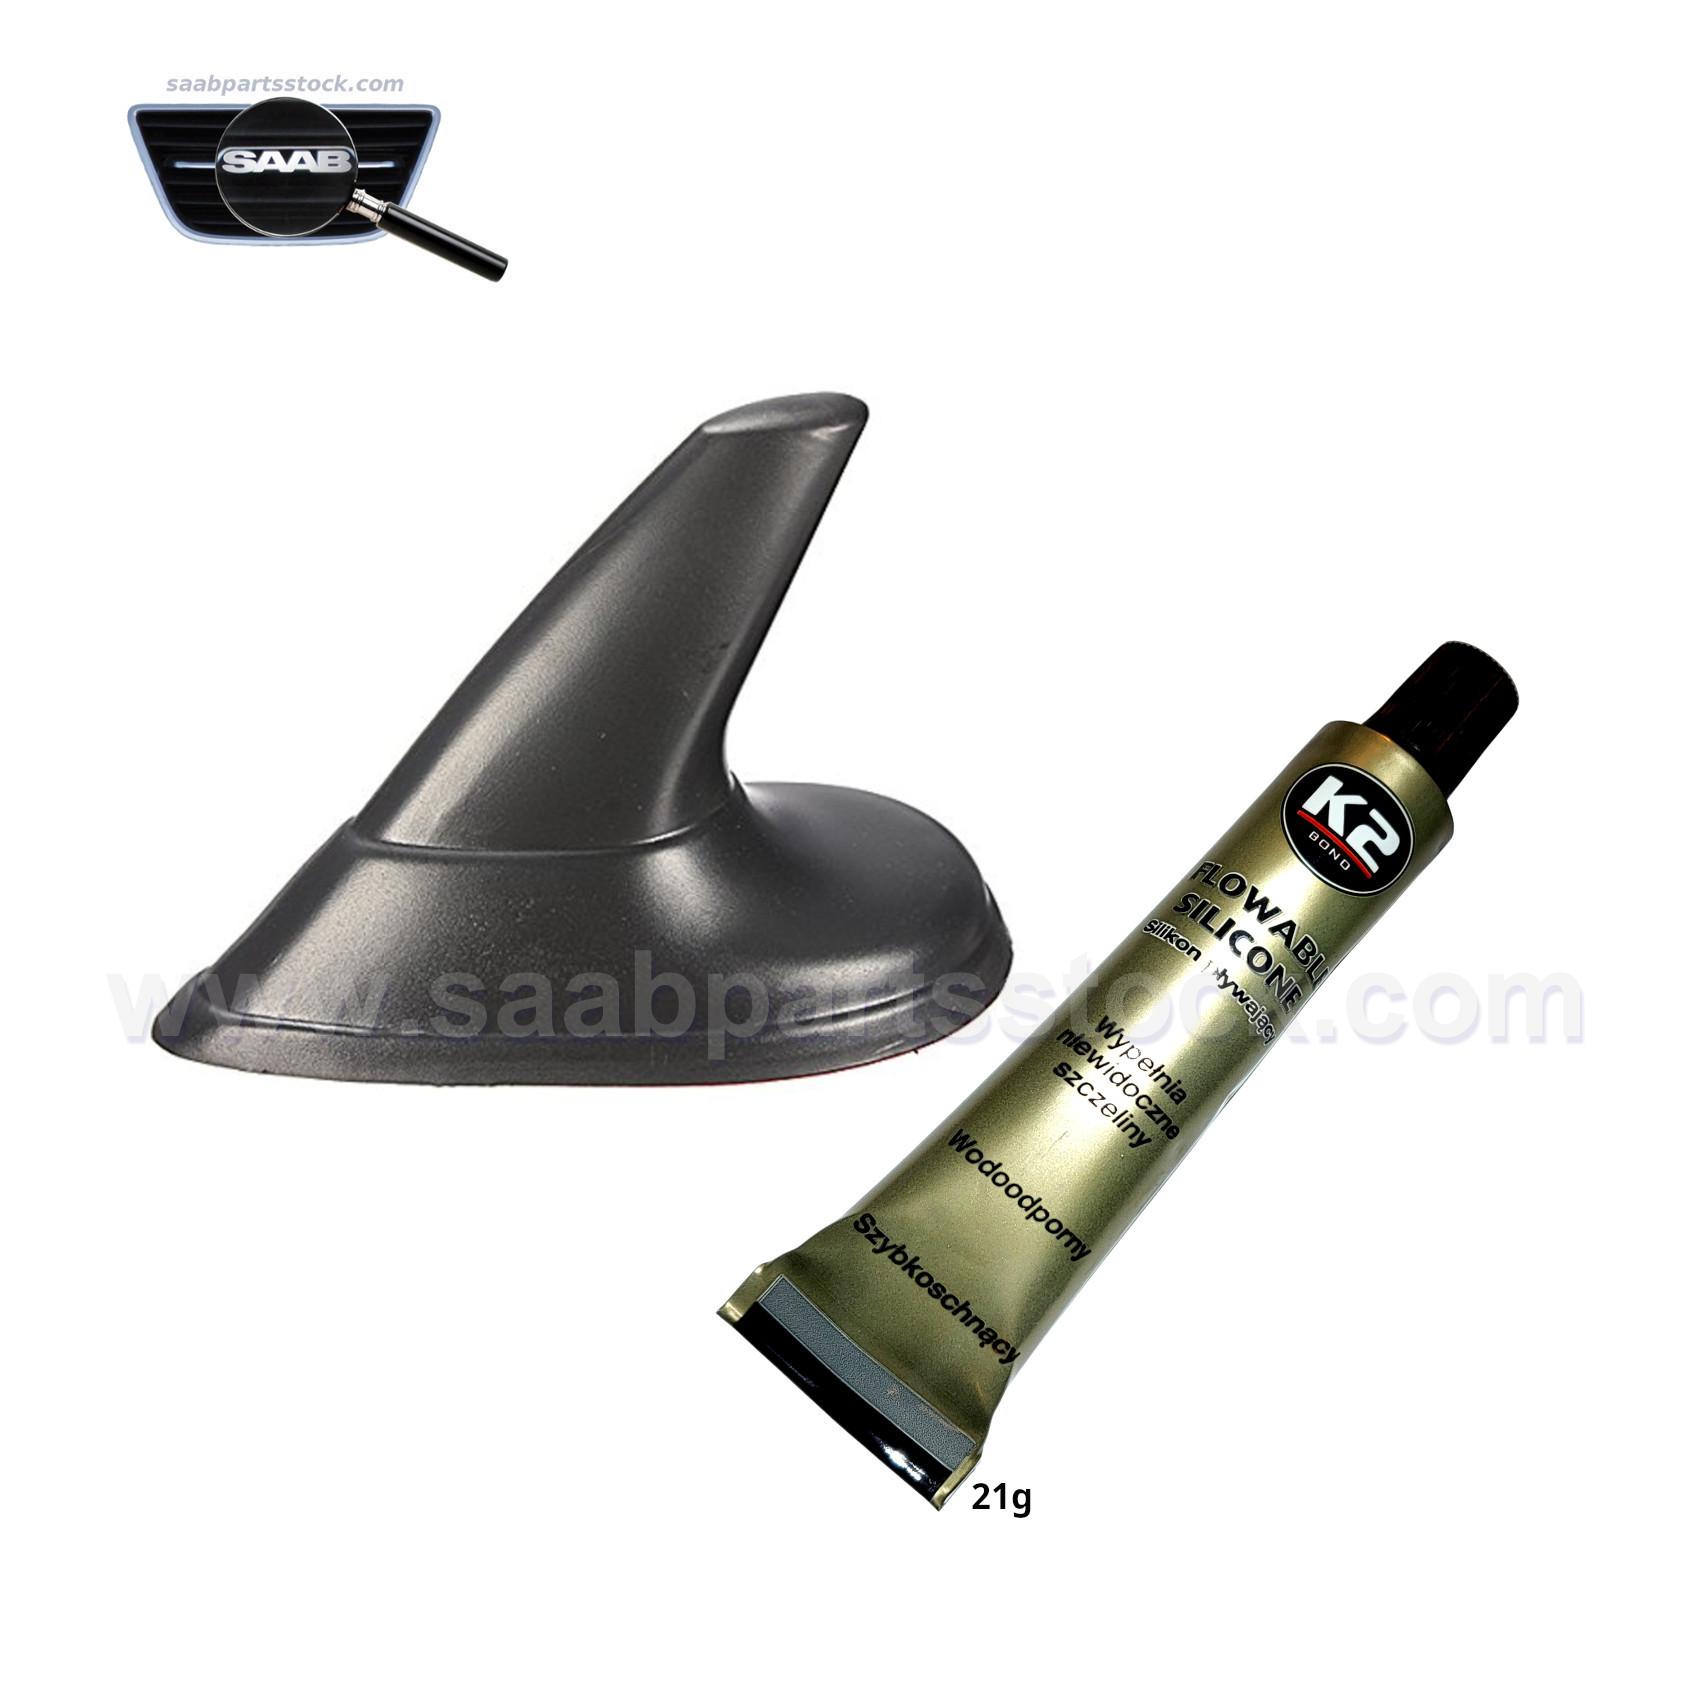 The Kit of Cover for SAAB Genuine Roof Antenna